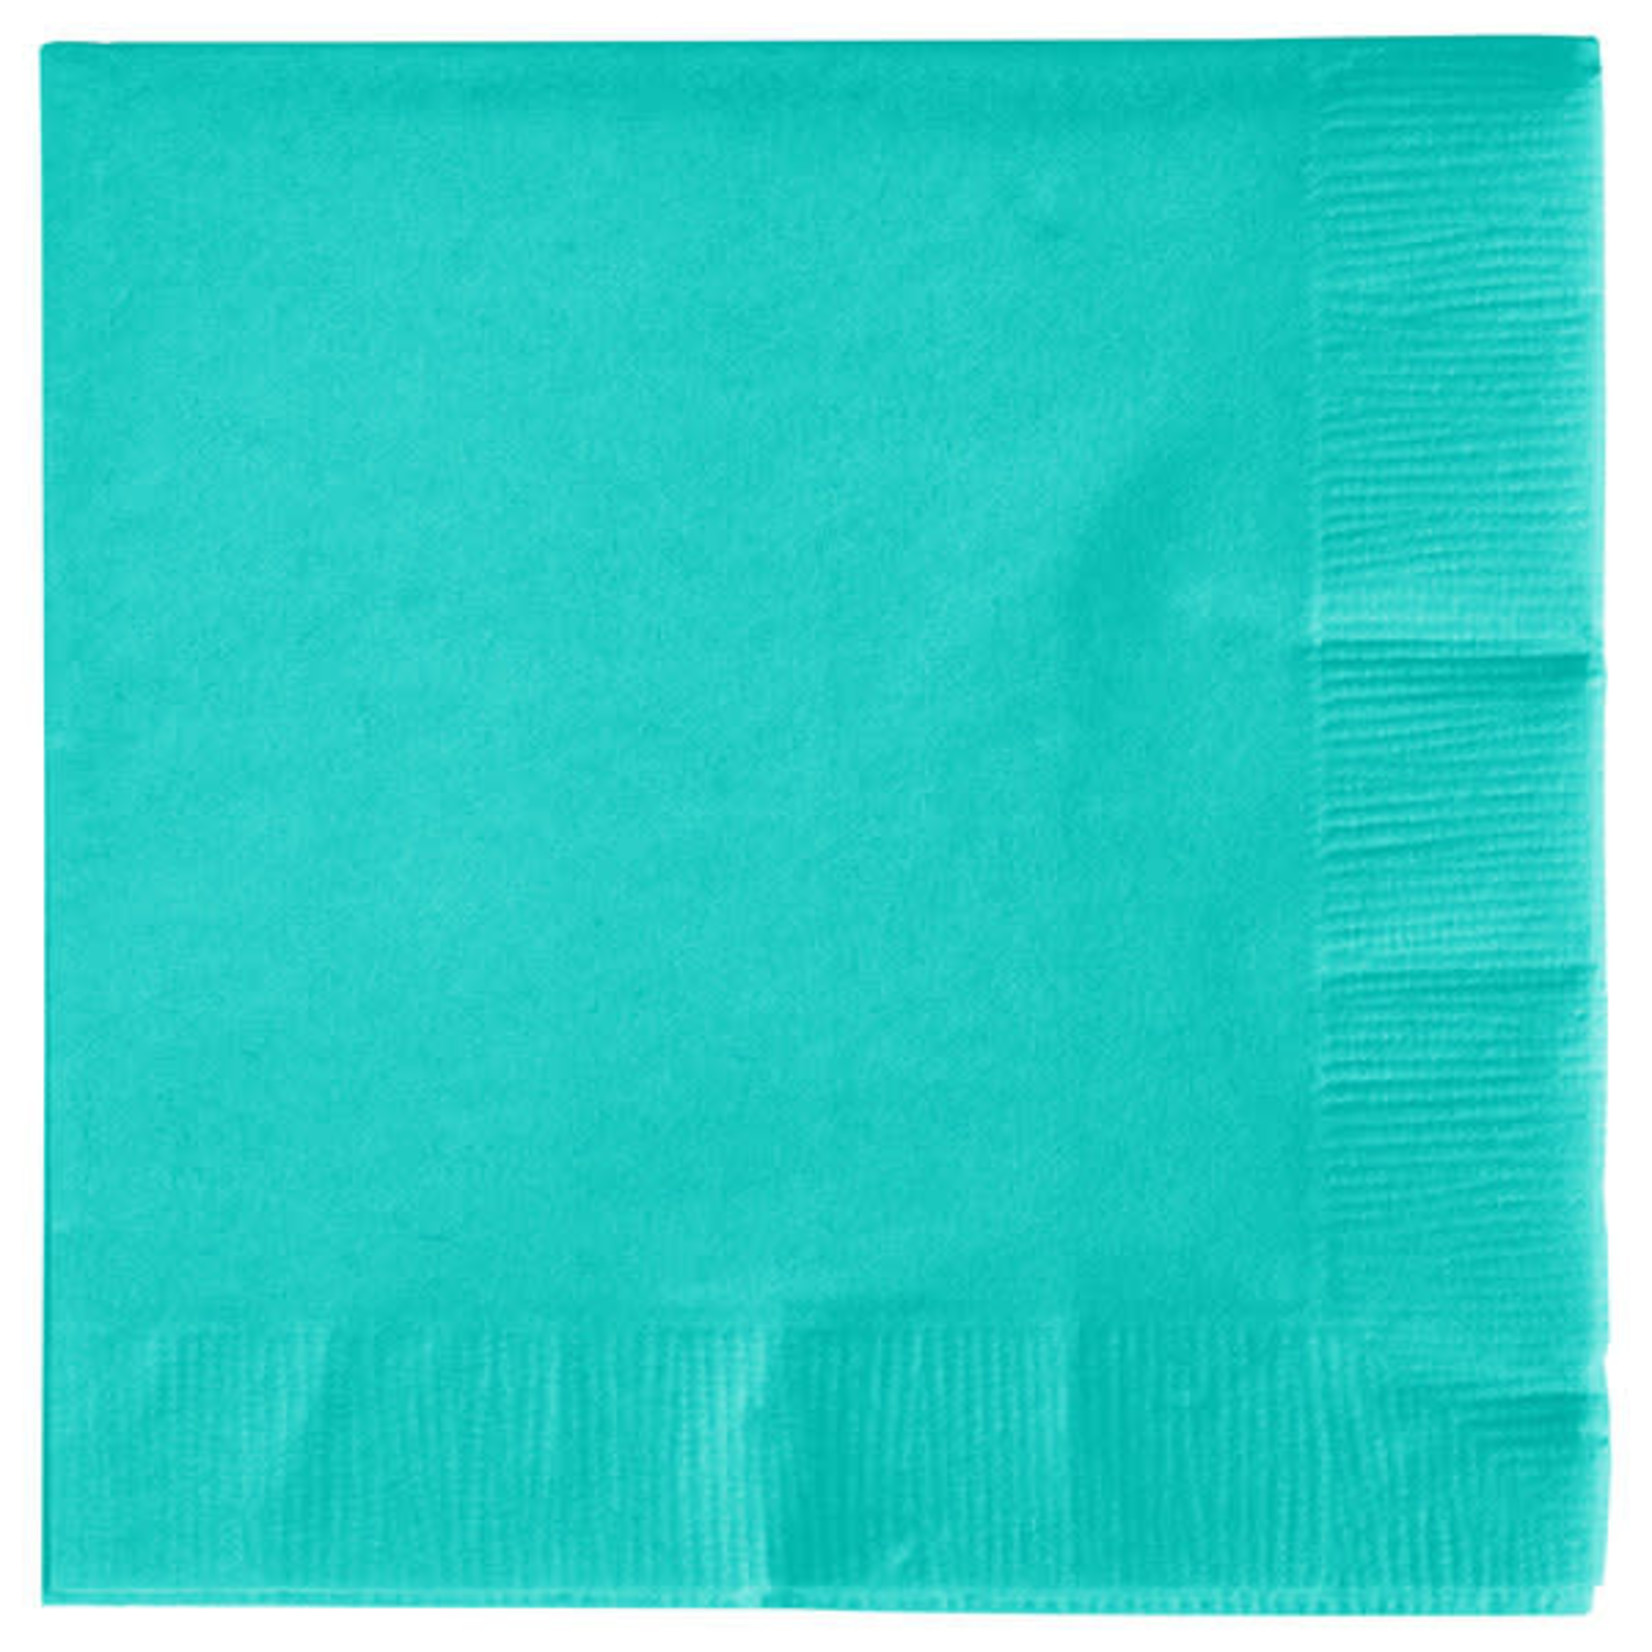 Touch of Color Teal, Cocktail Napkin -  50/Pack